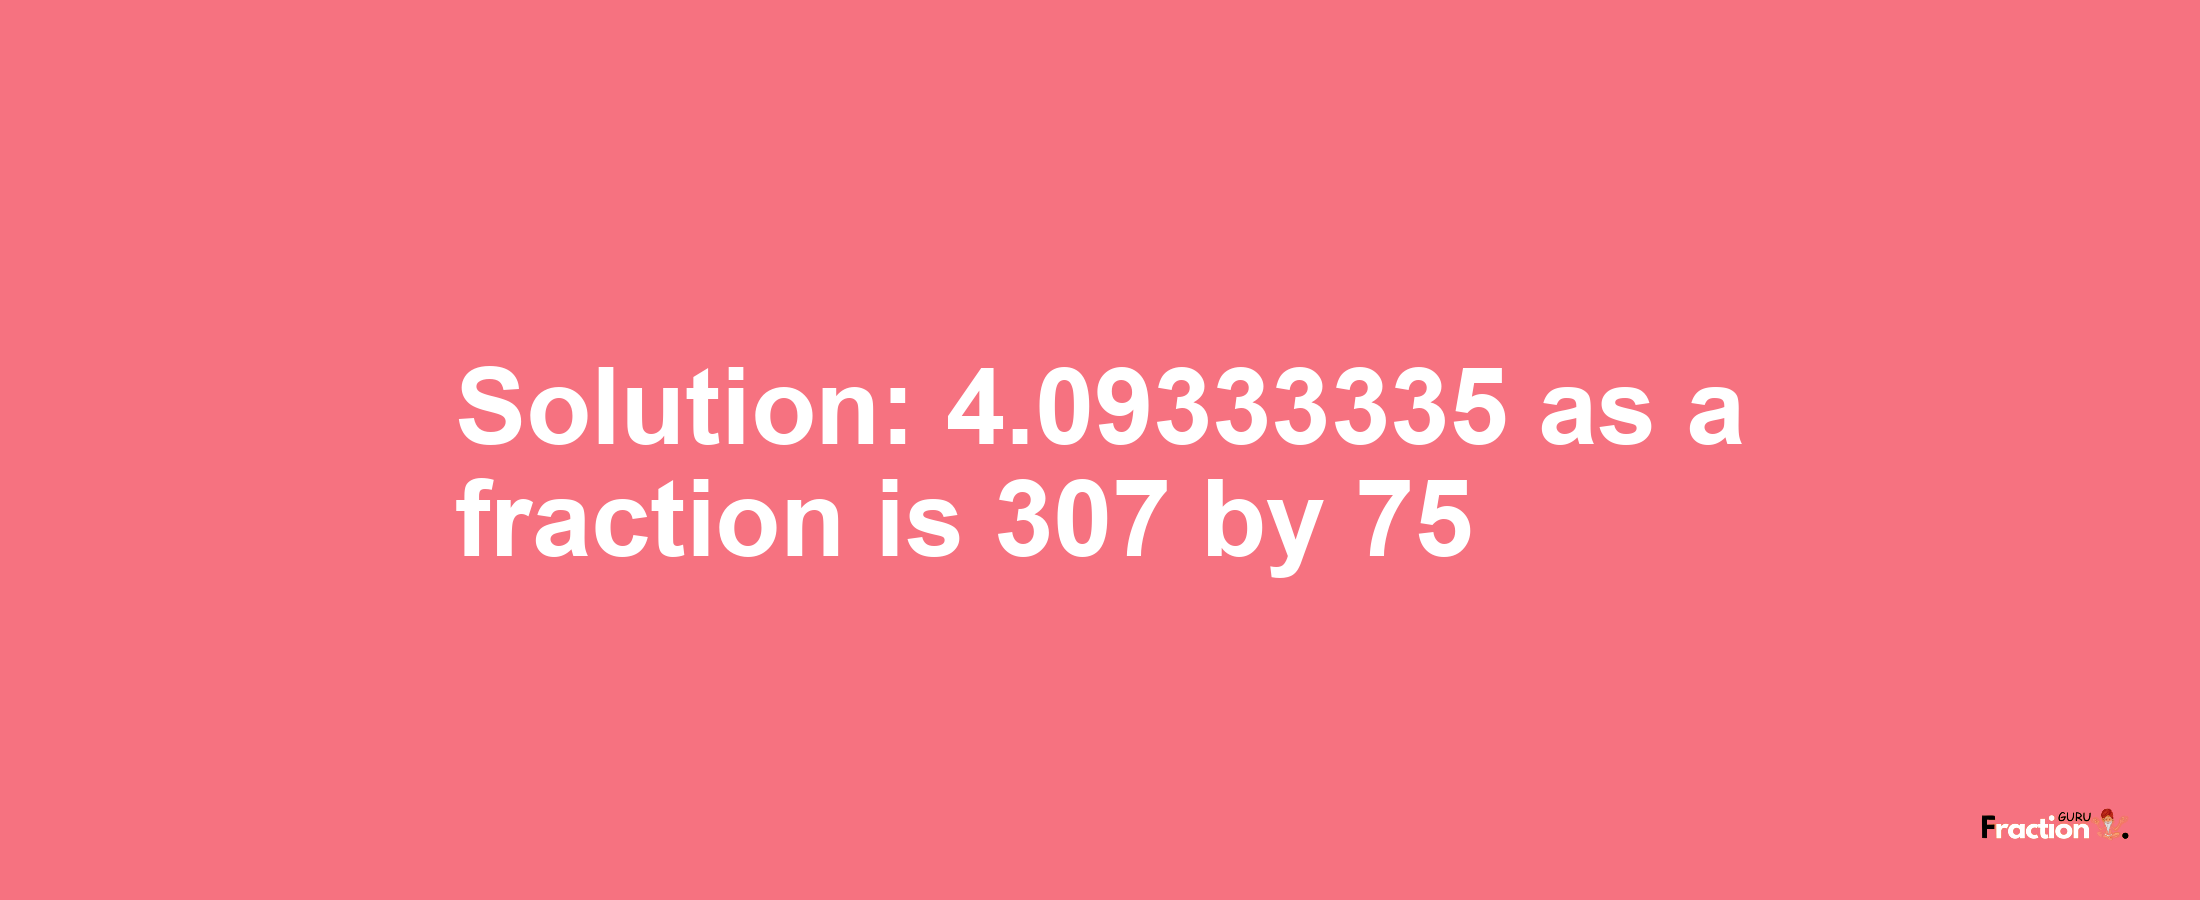 Solution:4.09333335 as a fraction is 307/75